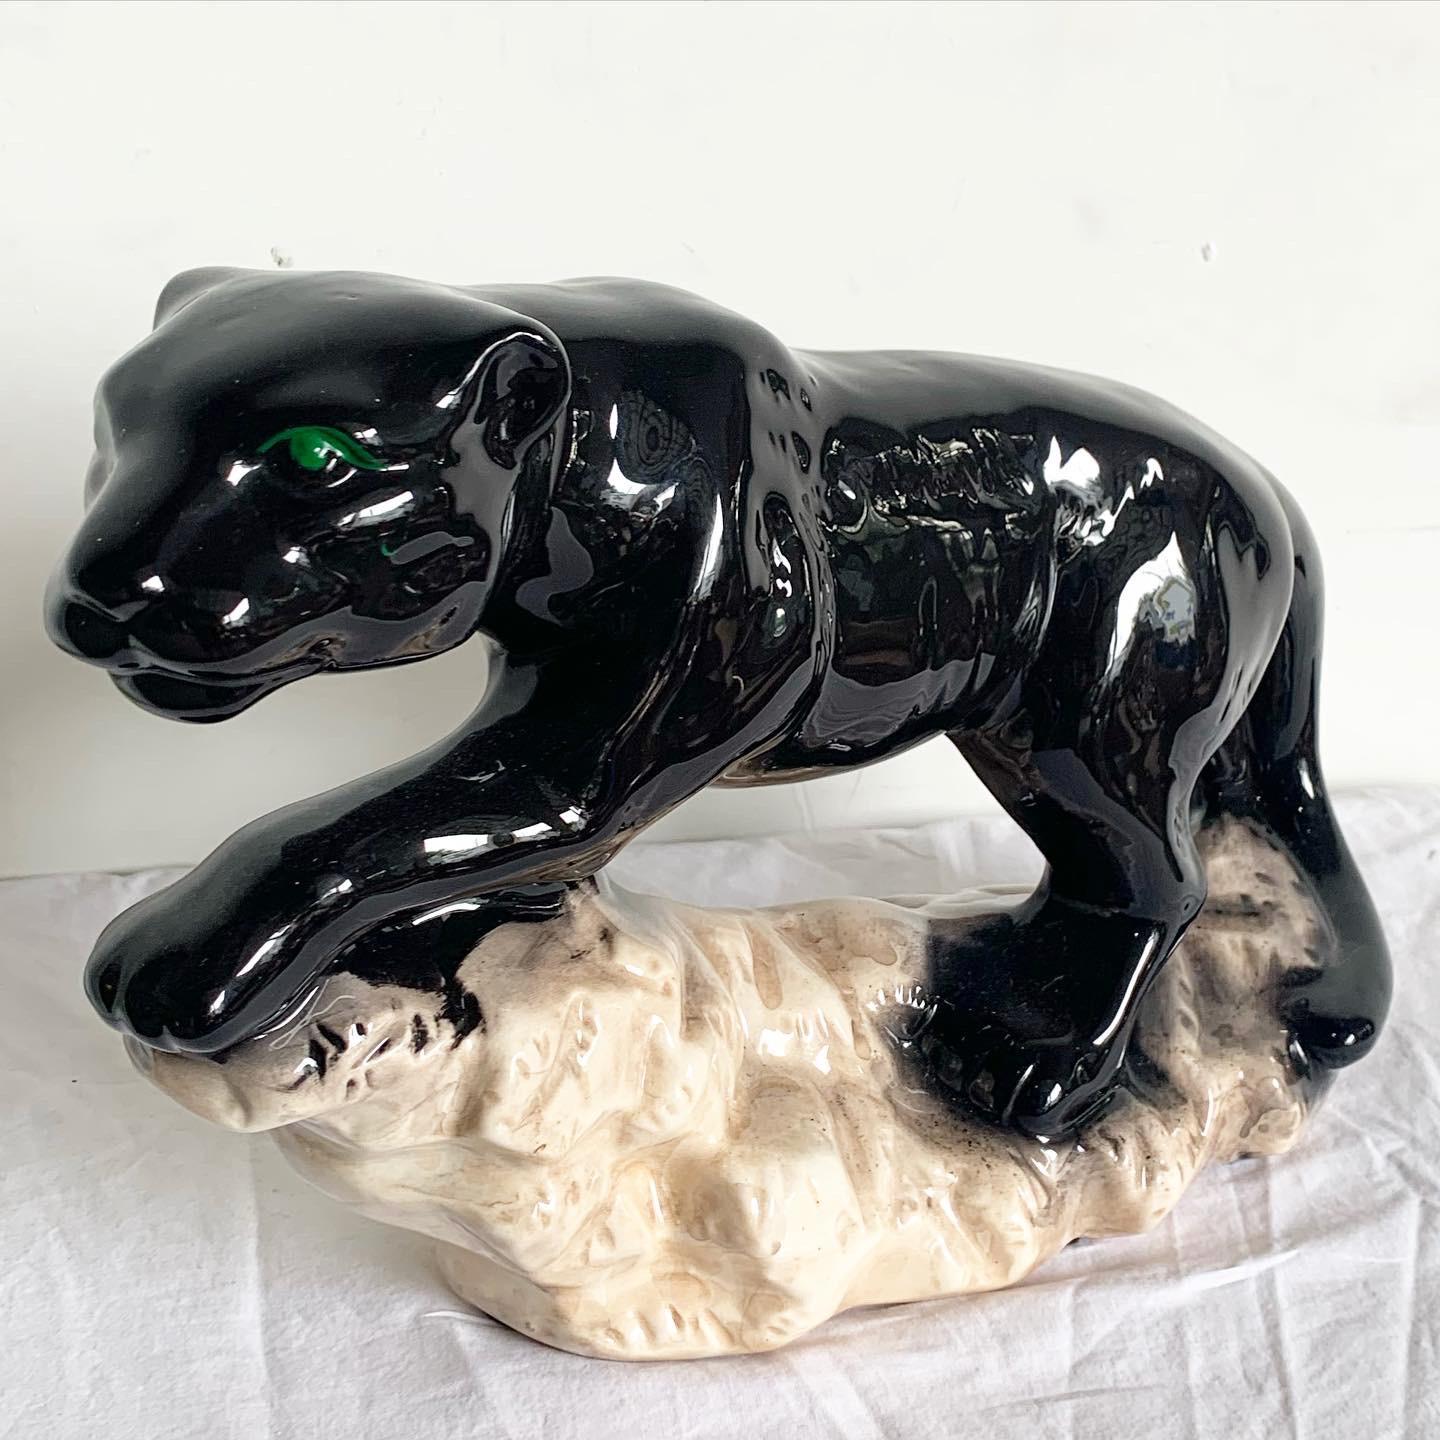 Elevate your decor with the Postmodern Black Gloss Ceramic Panther Sculpture. This striking piece, finished in a deep black gloss, captures the panther's elegance and strength mid-prowl. Crafted from high-quality ceramic, its lustrous finish